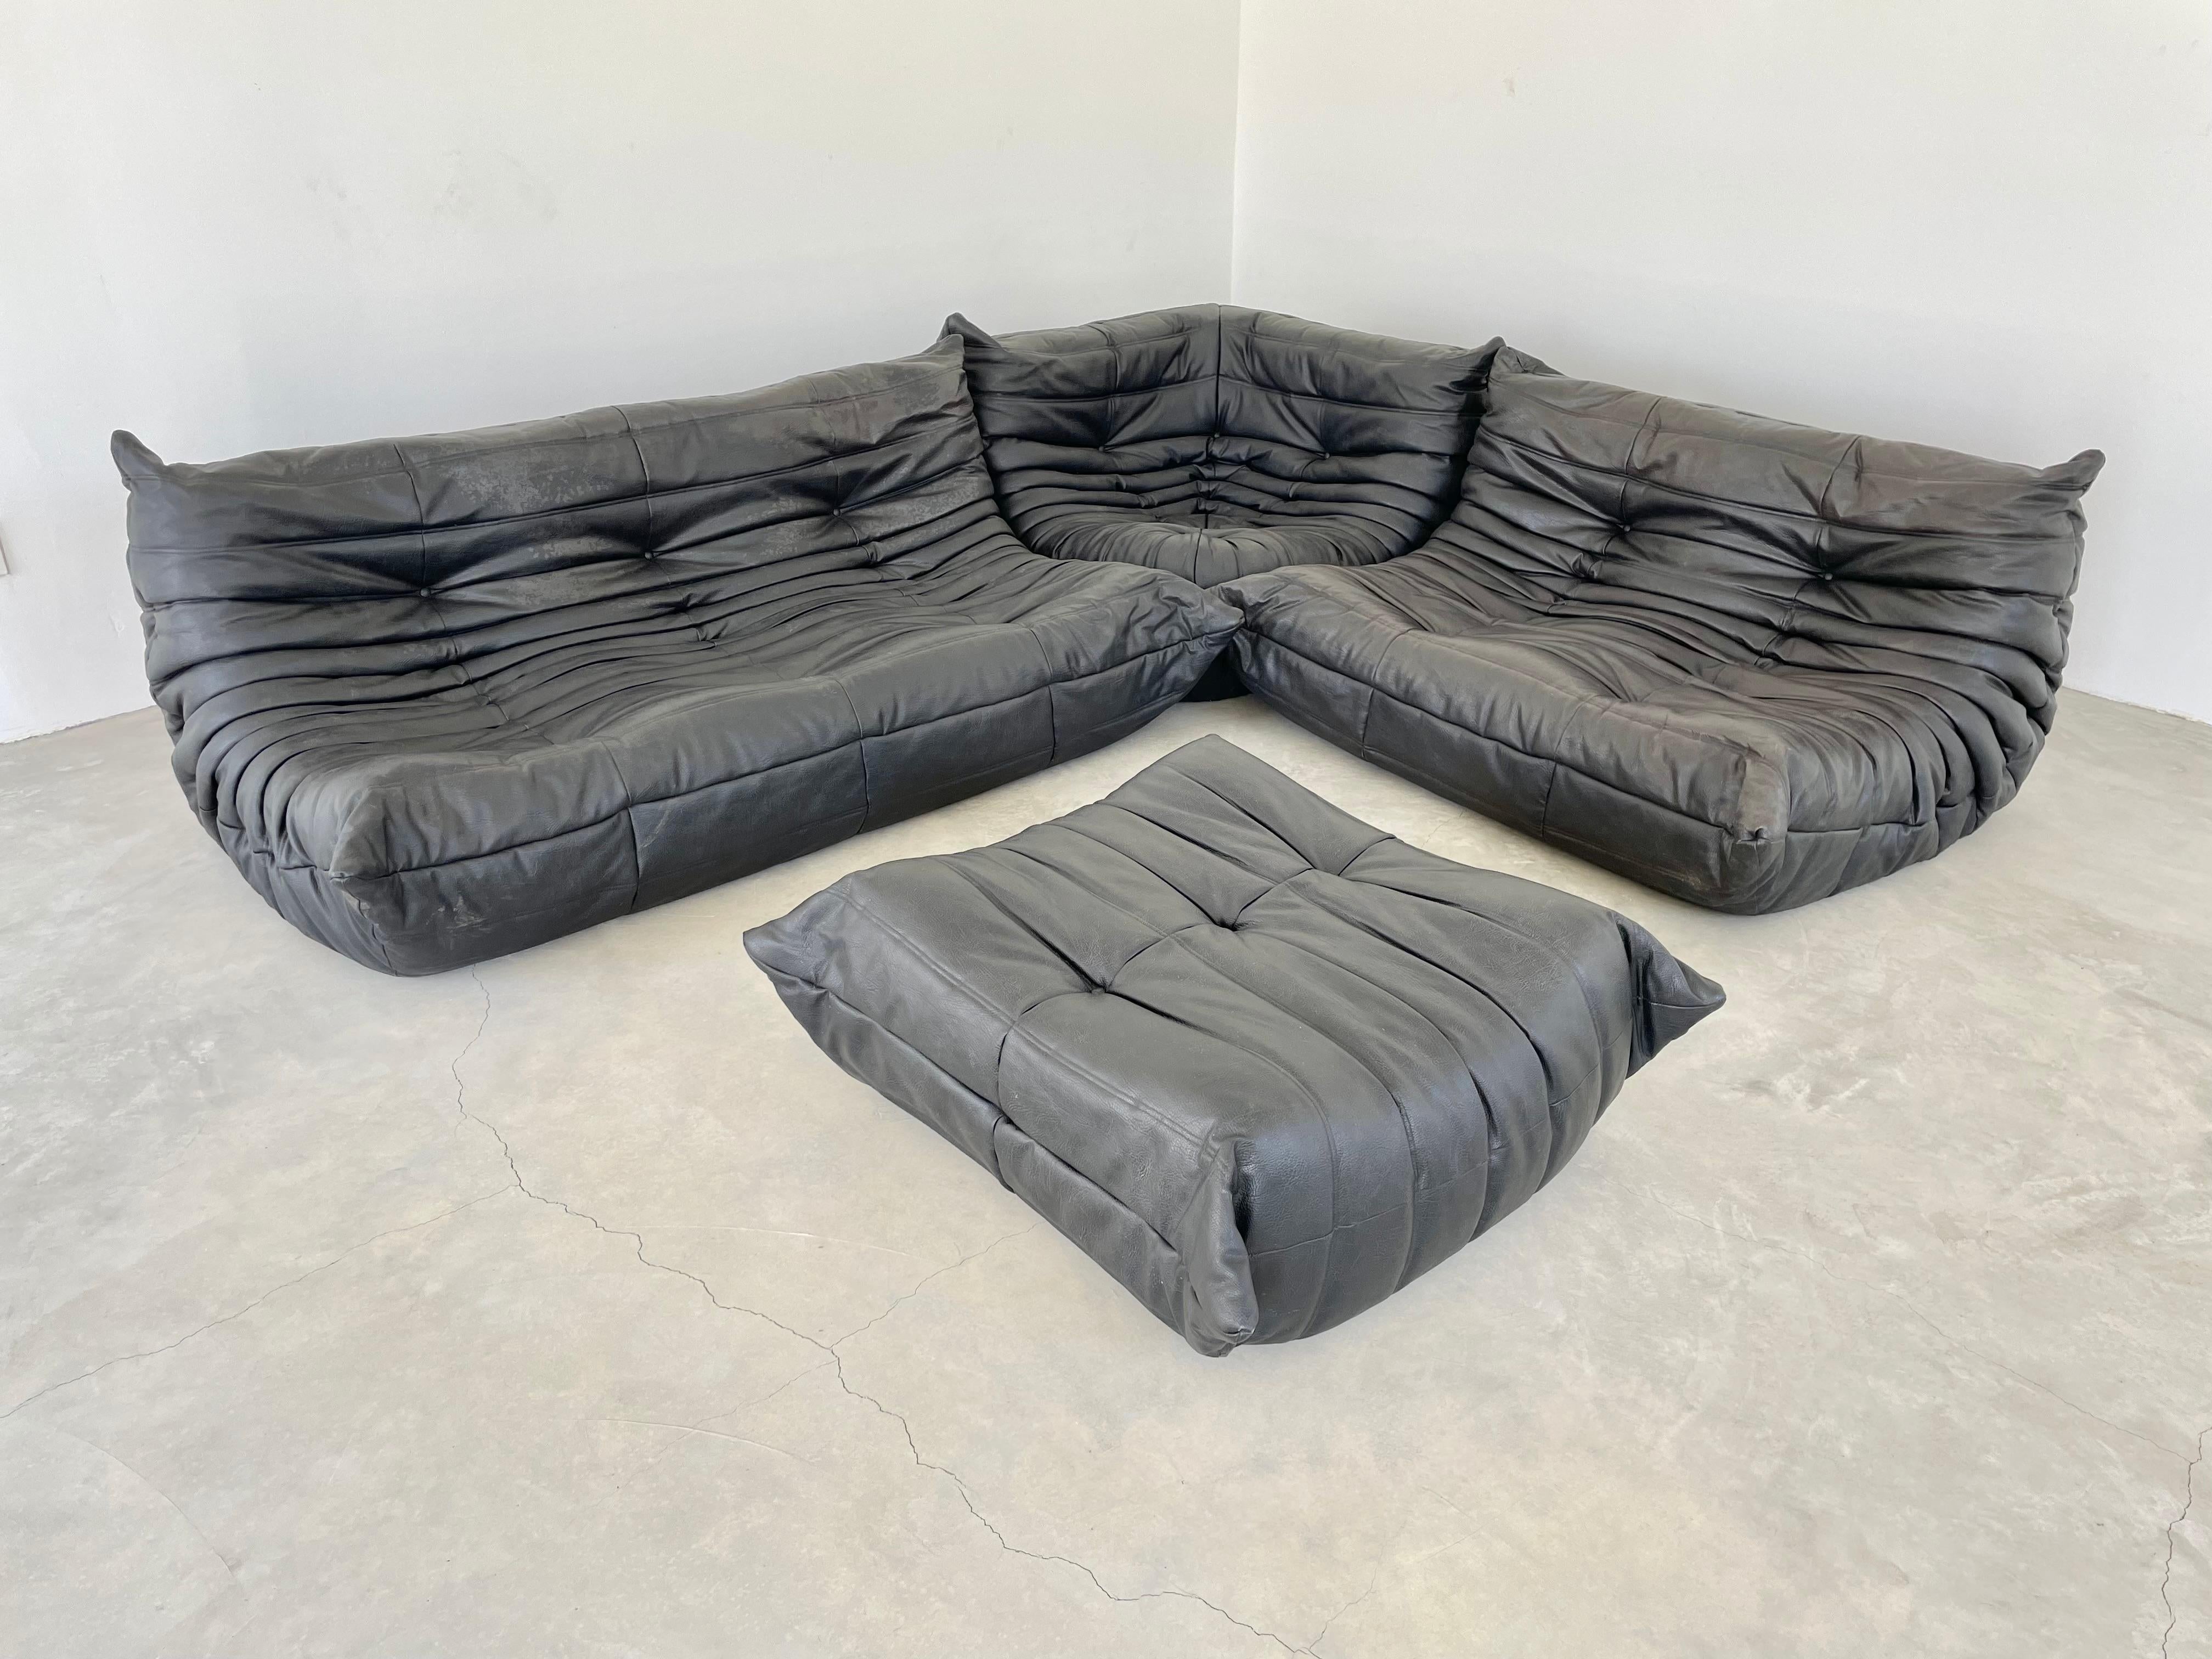 Classic French Togo set by Michel Ducaroy for luxury brand Ligne Roset. Originally designed in the 1970s the iconic togo sofa is now a design classic. This set comes in its original vintage pebbled black leather.

Timeless comfort and style make